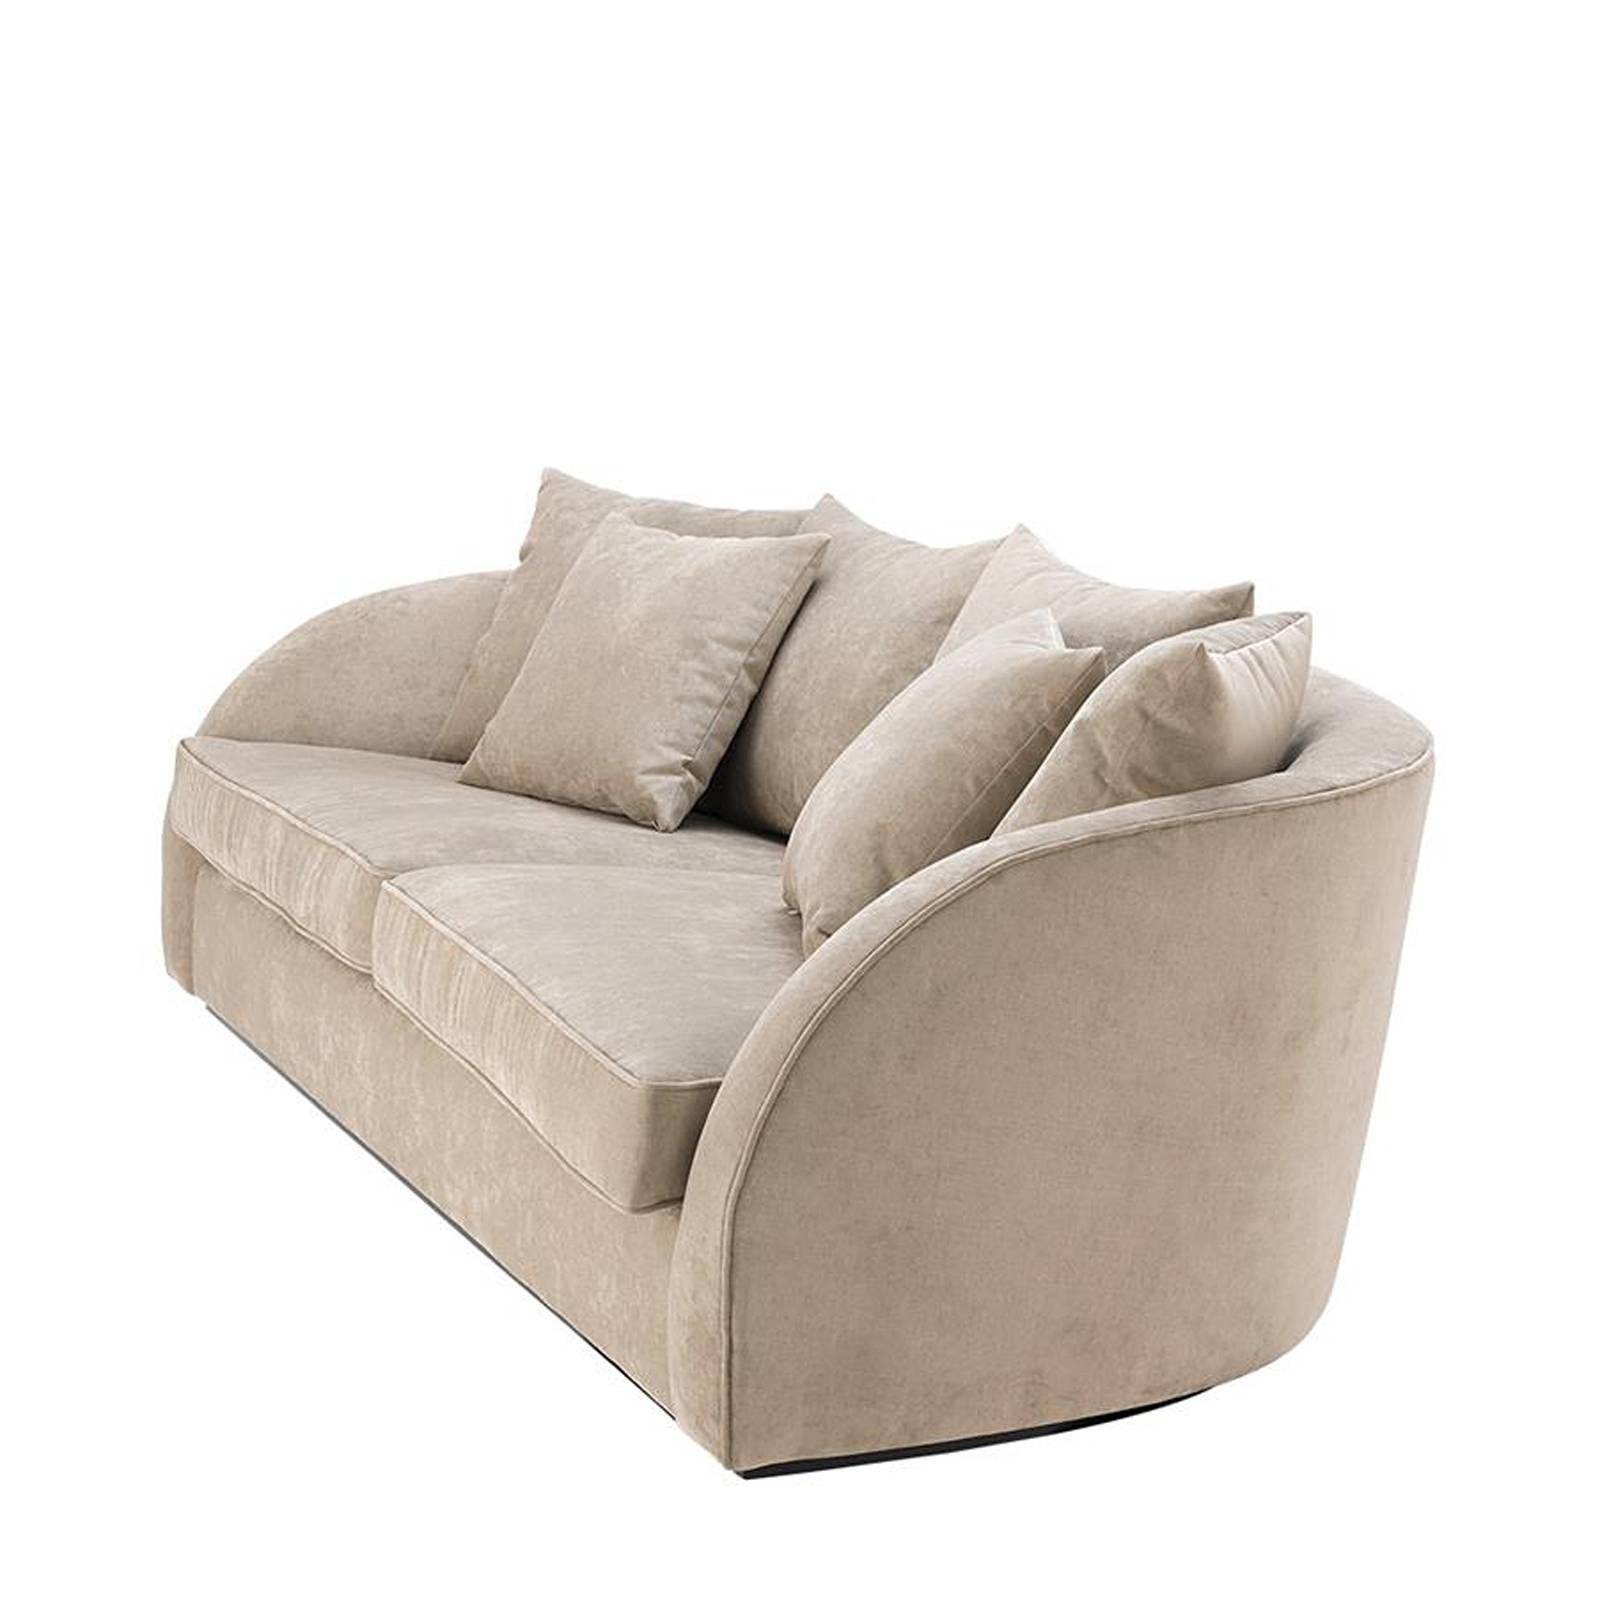 Sofa Miami lounge with structure in solid
birchwood and upholstered with greige velvet
fabric. Also available with black panama fabric
or natural panama fabric. Also available in
armchair Miami lounge.
